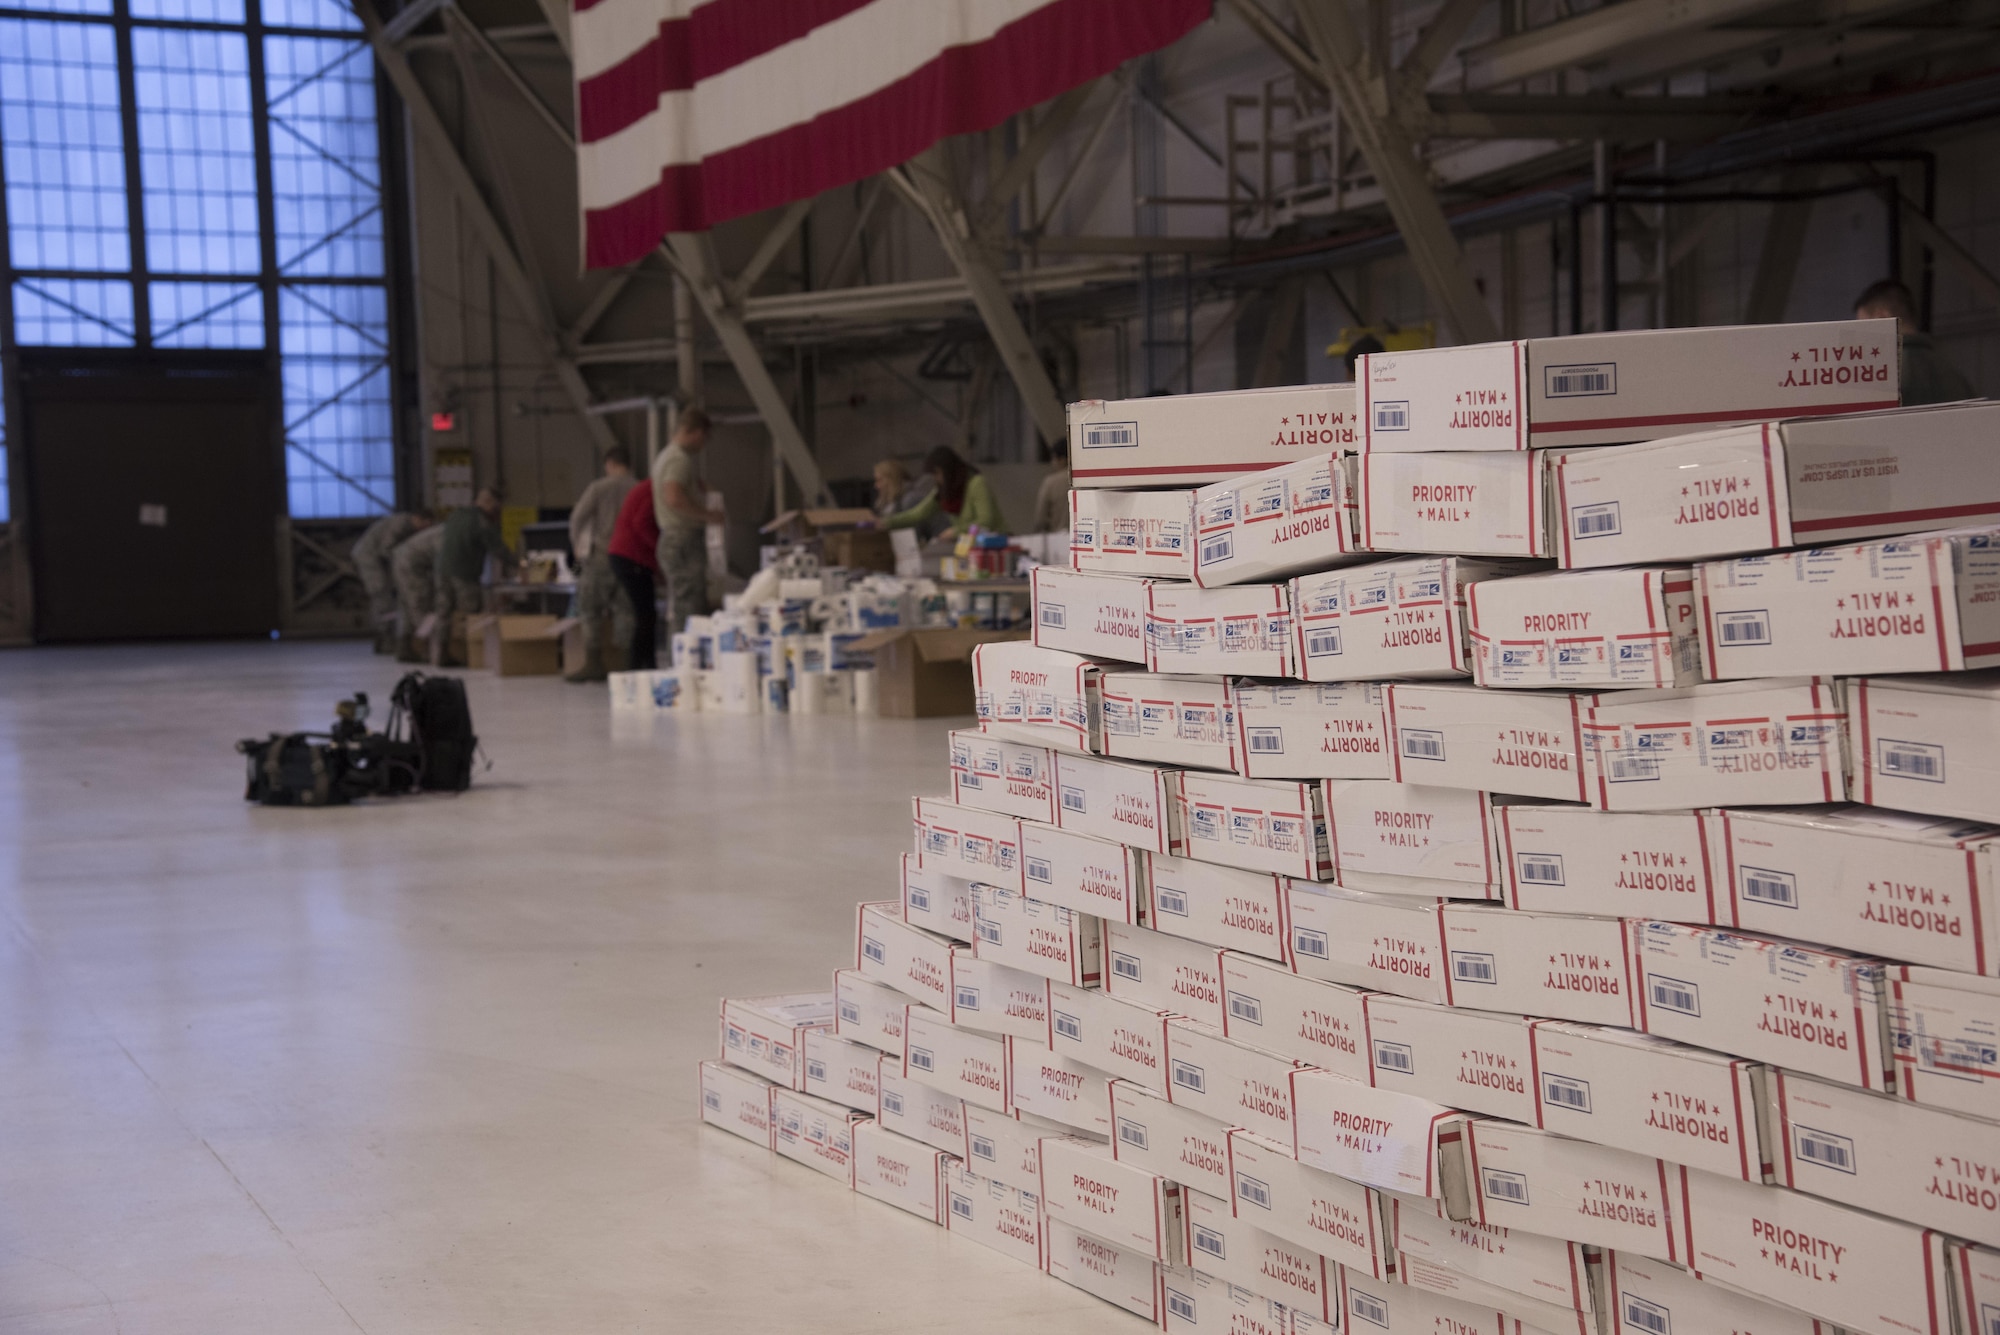 Team Fairchild volunteers pack more than 400 care packages for deployed military members as part of a KREM 2 News Station initiative, Treats 2 Troops, Dec. 1, 2016 at Fairchild Air Force Base. The care packages are filled with small treats and items such as beef jerky, sanitizer wipes, lens cleaning cloths, shampoo and hand-held games. (U.S. Air Force photo/Senior Airman Nick J. Daniello)